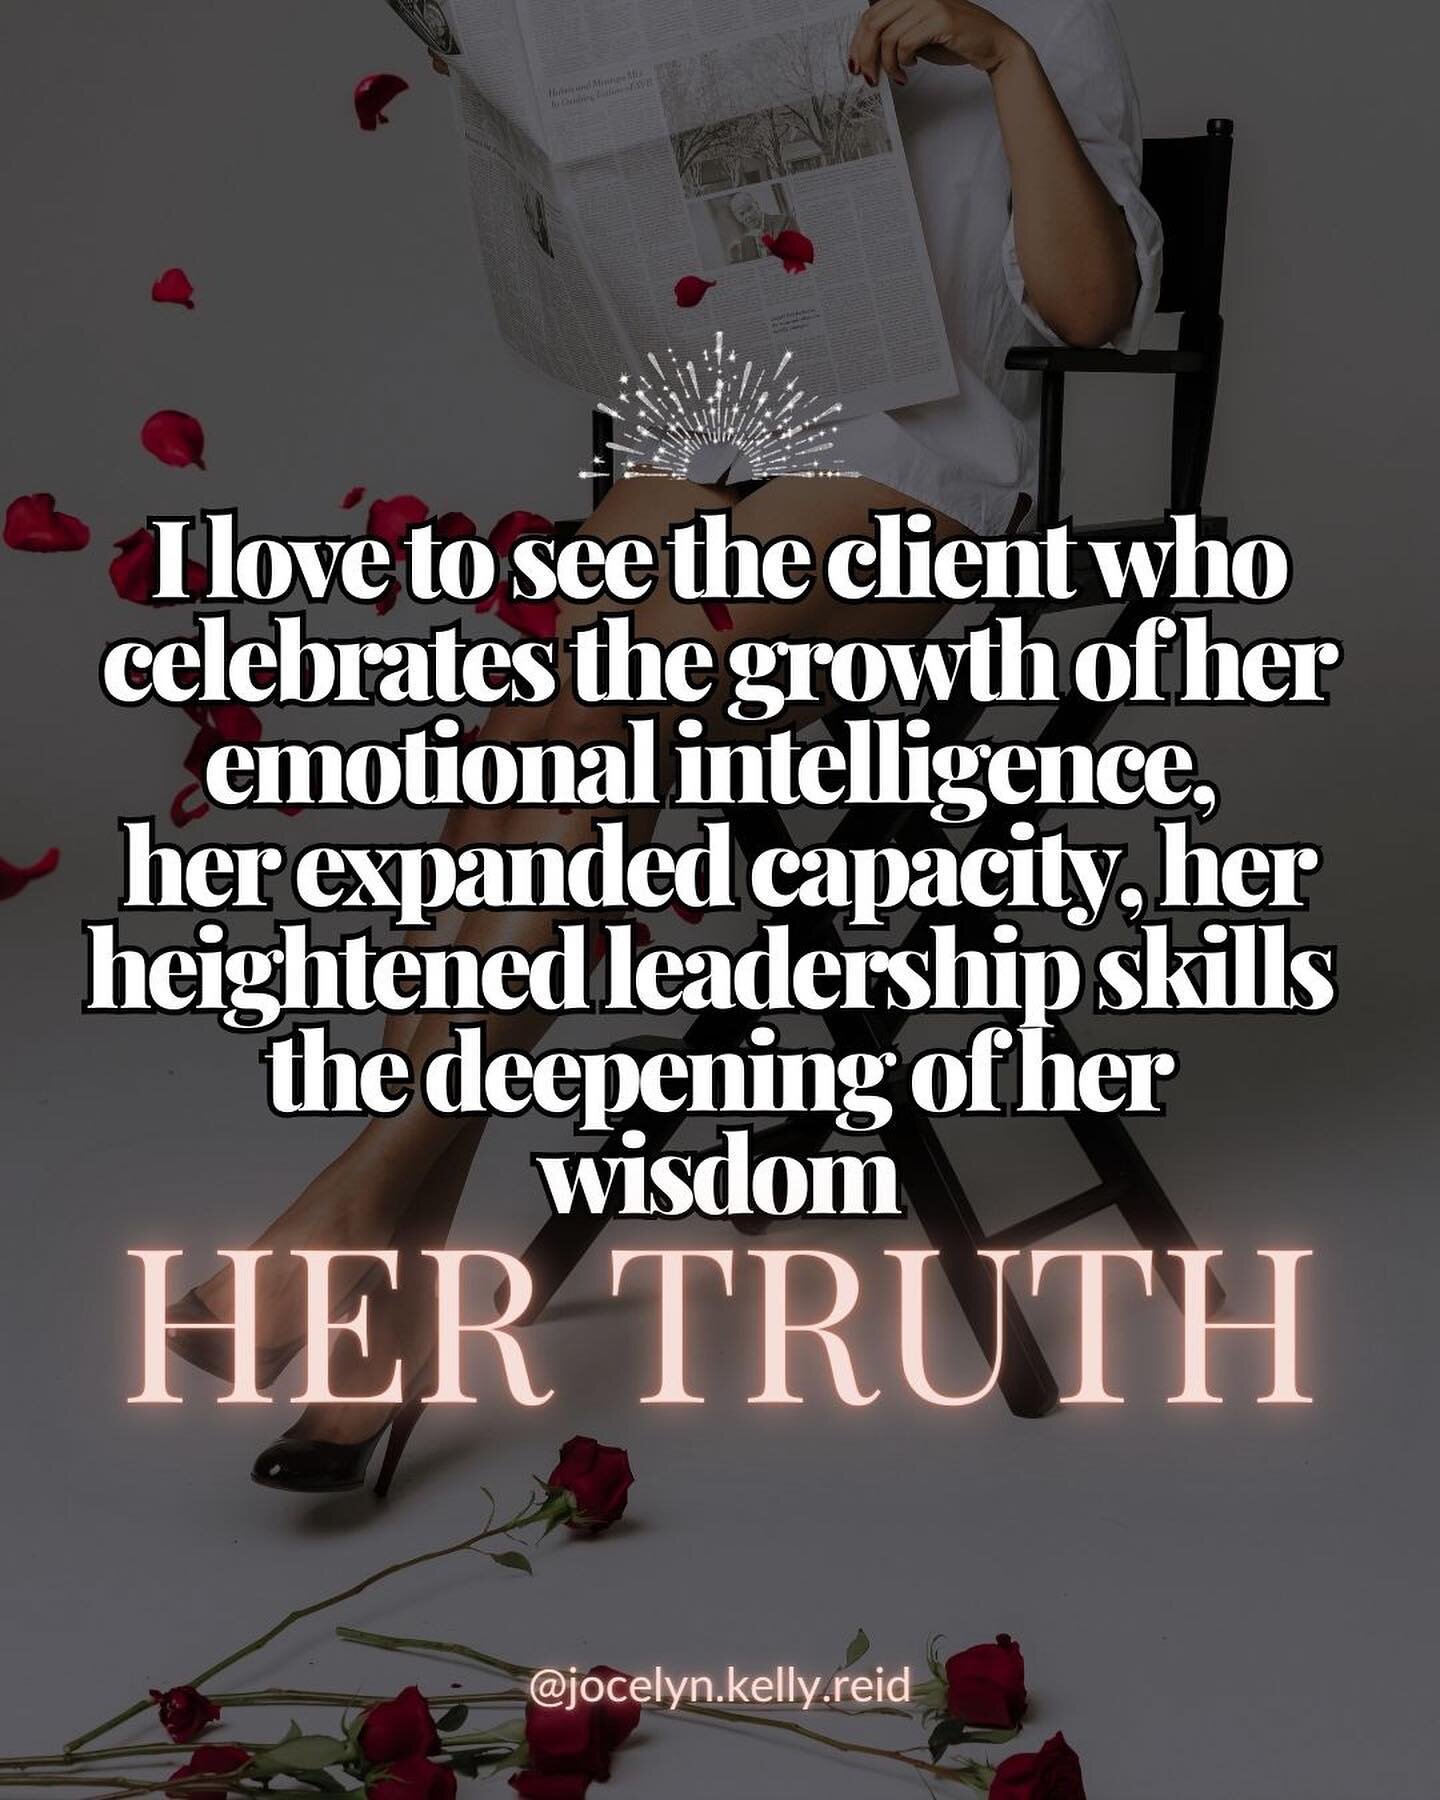 I love to see the client who celebrates the growth of her emotional intelligence, expanded capacity, heightened leadership skills, the deepening of her wisdom 

HER TRUTH 

Because not only do I know this woman is on the fast track to stacking the ca